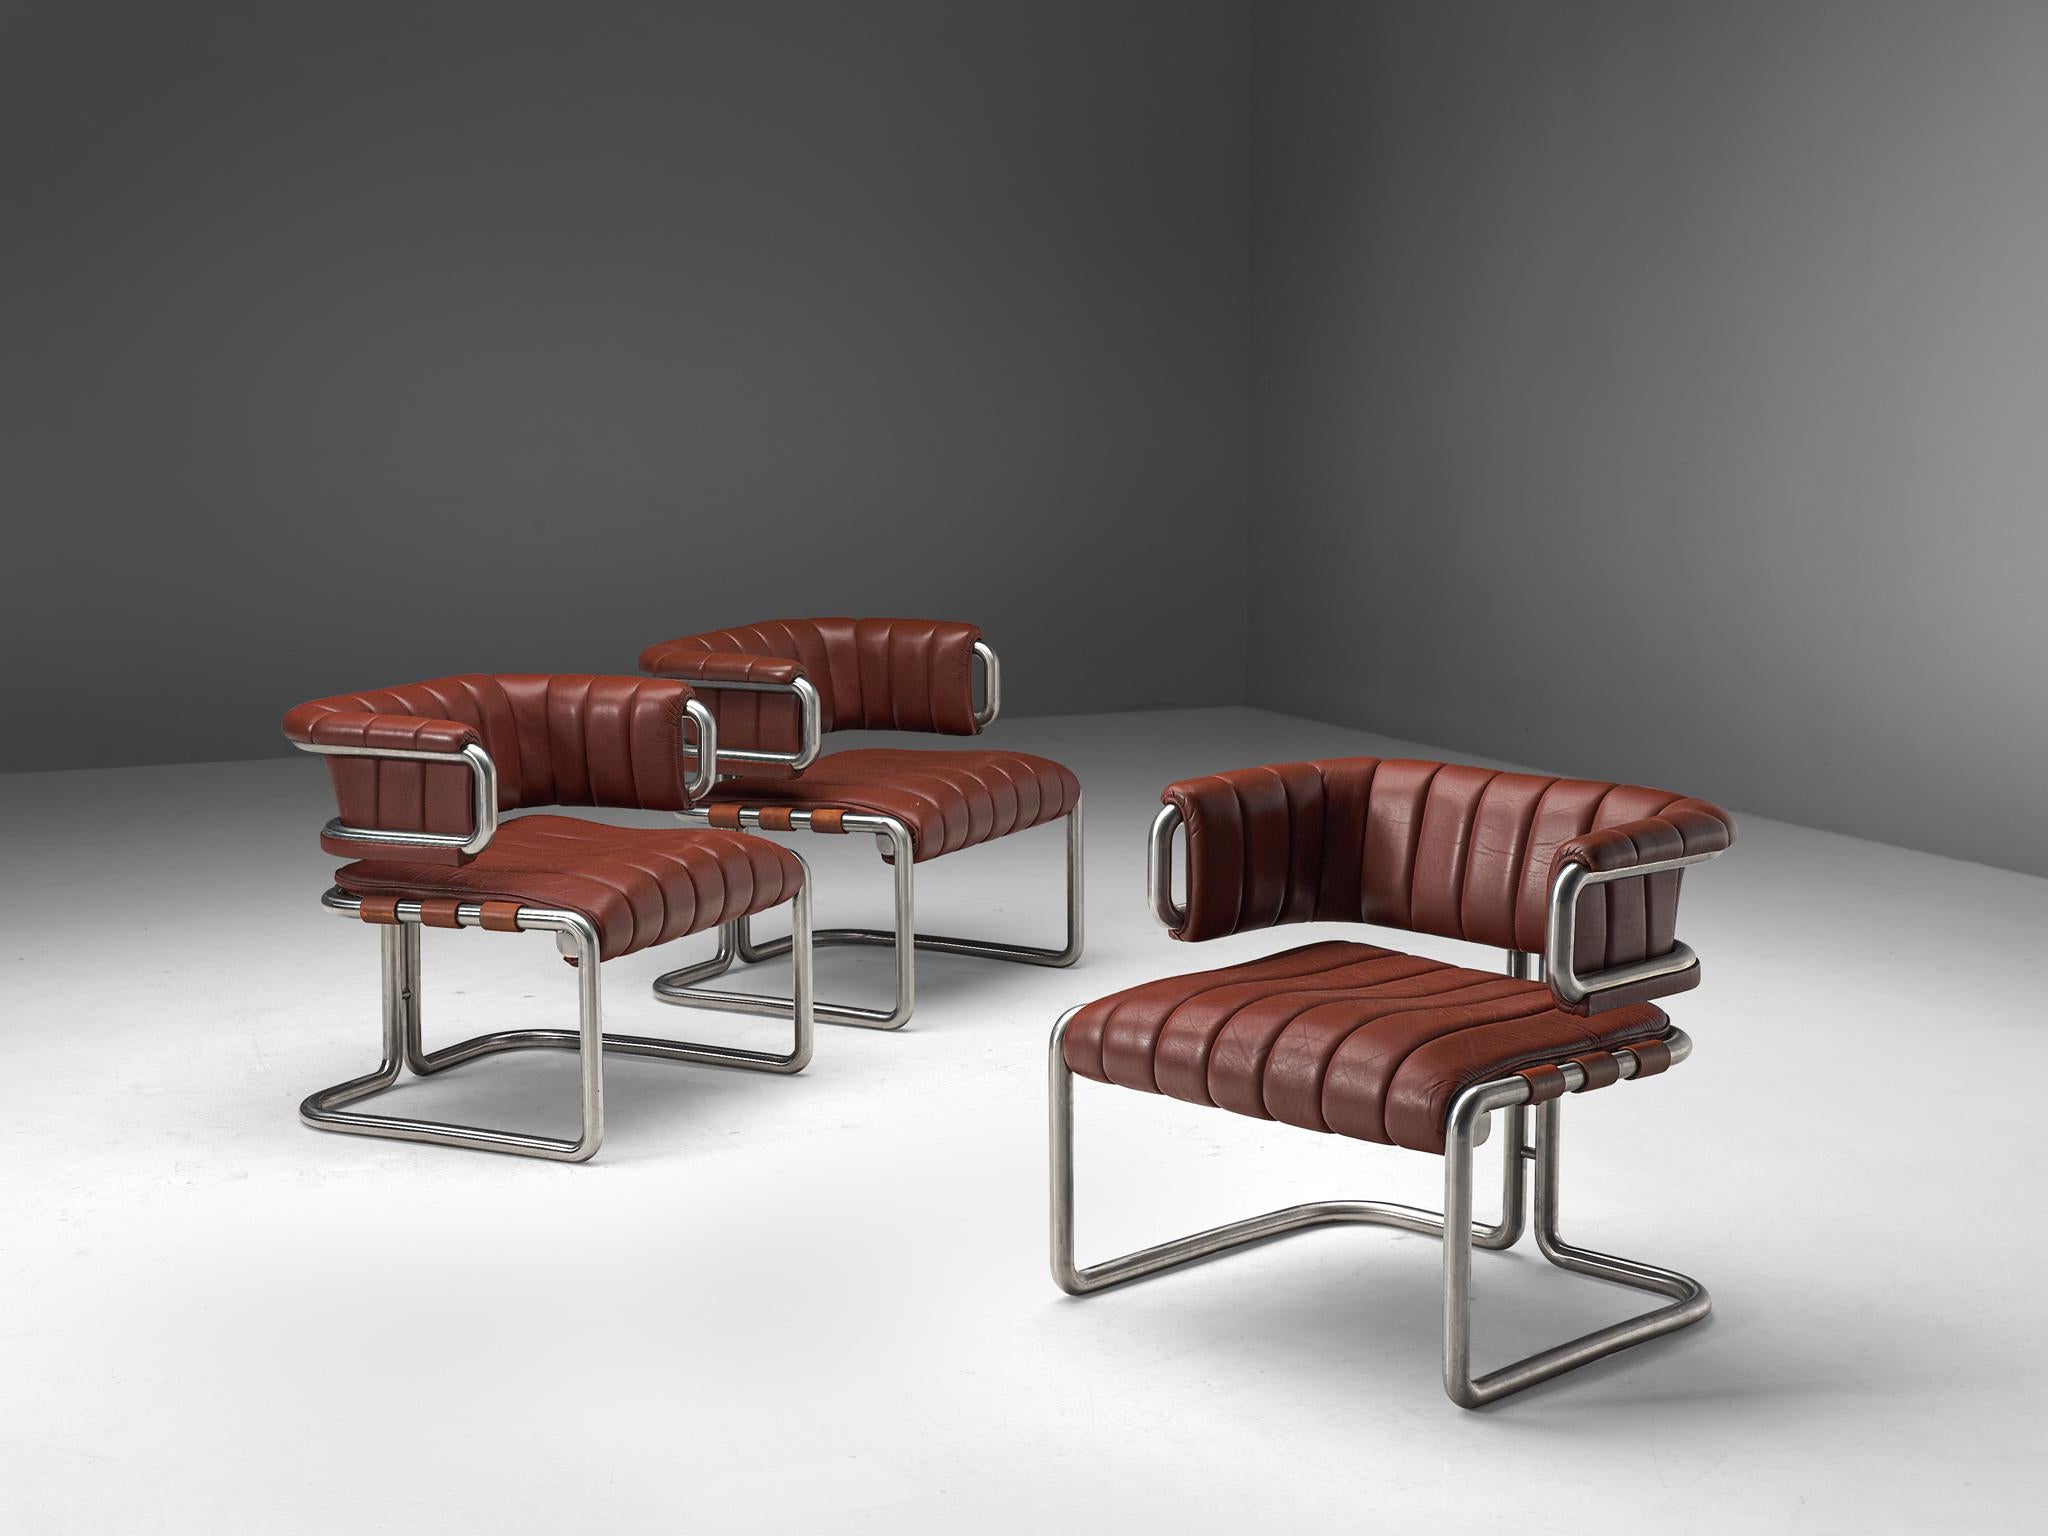 Set of three lounge chairs, leather and metal, Germany, 1960s

Set of three dark red leather chairs with metal tubular steel. This set is characterized by clear, straight lines that are noticeable in the leather as well. The frame of these chairs